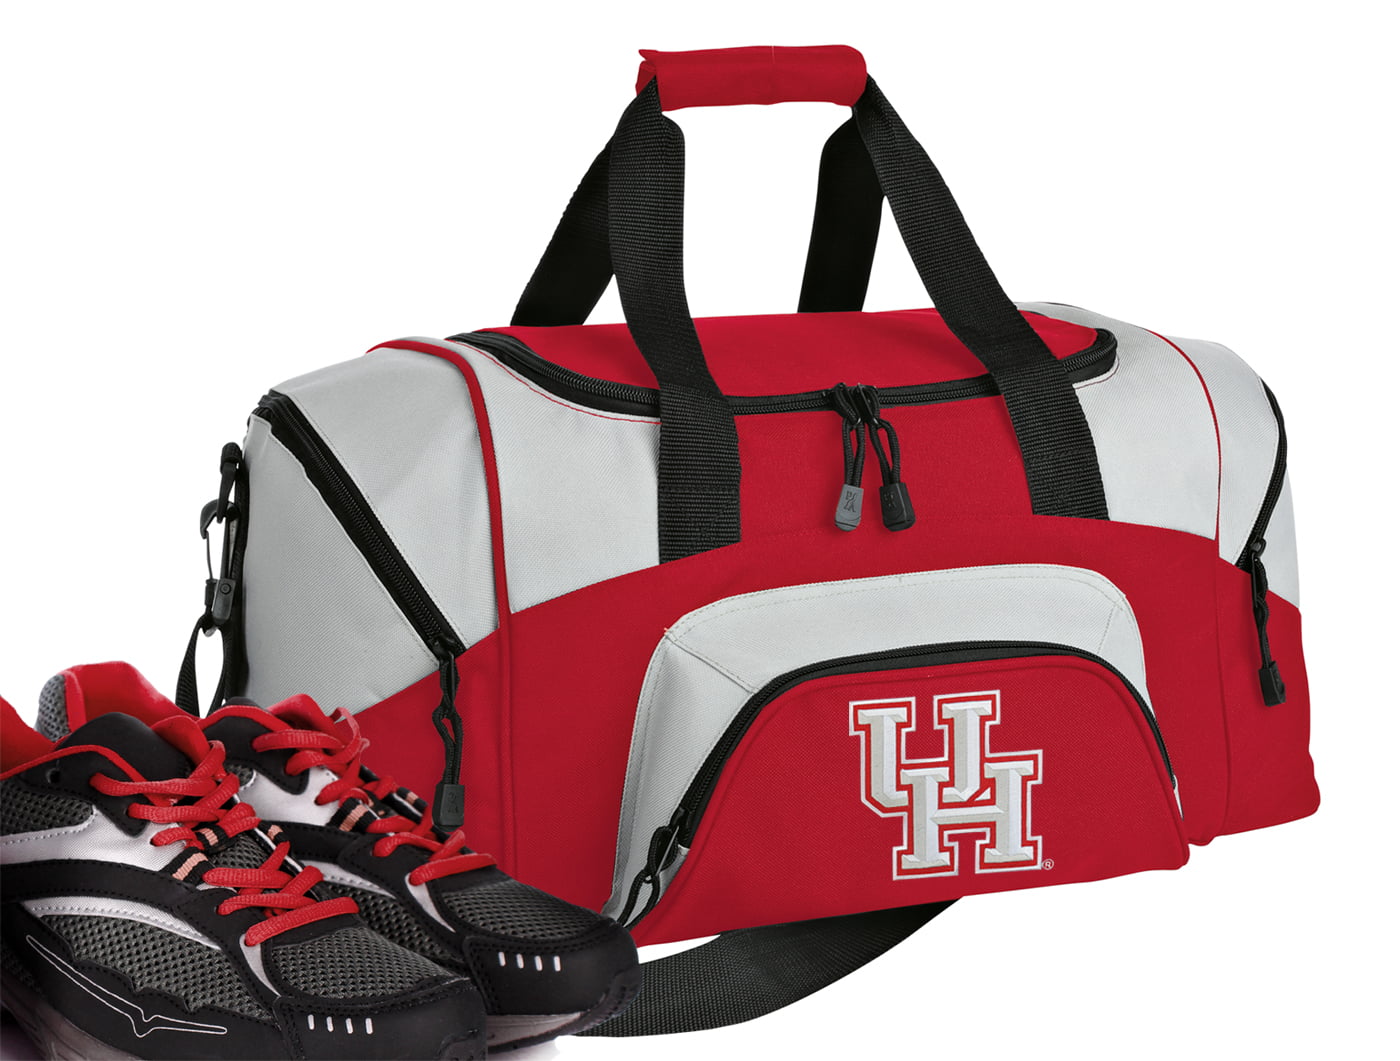 Broad Bay Small University of Houston Duffel Bag UH Gym Bags or Suitcase 